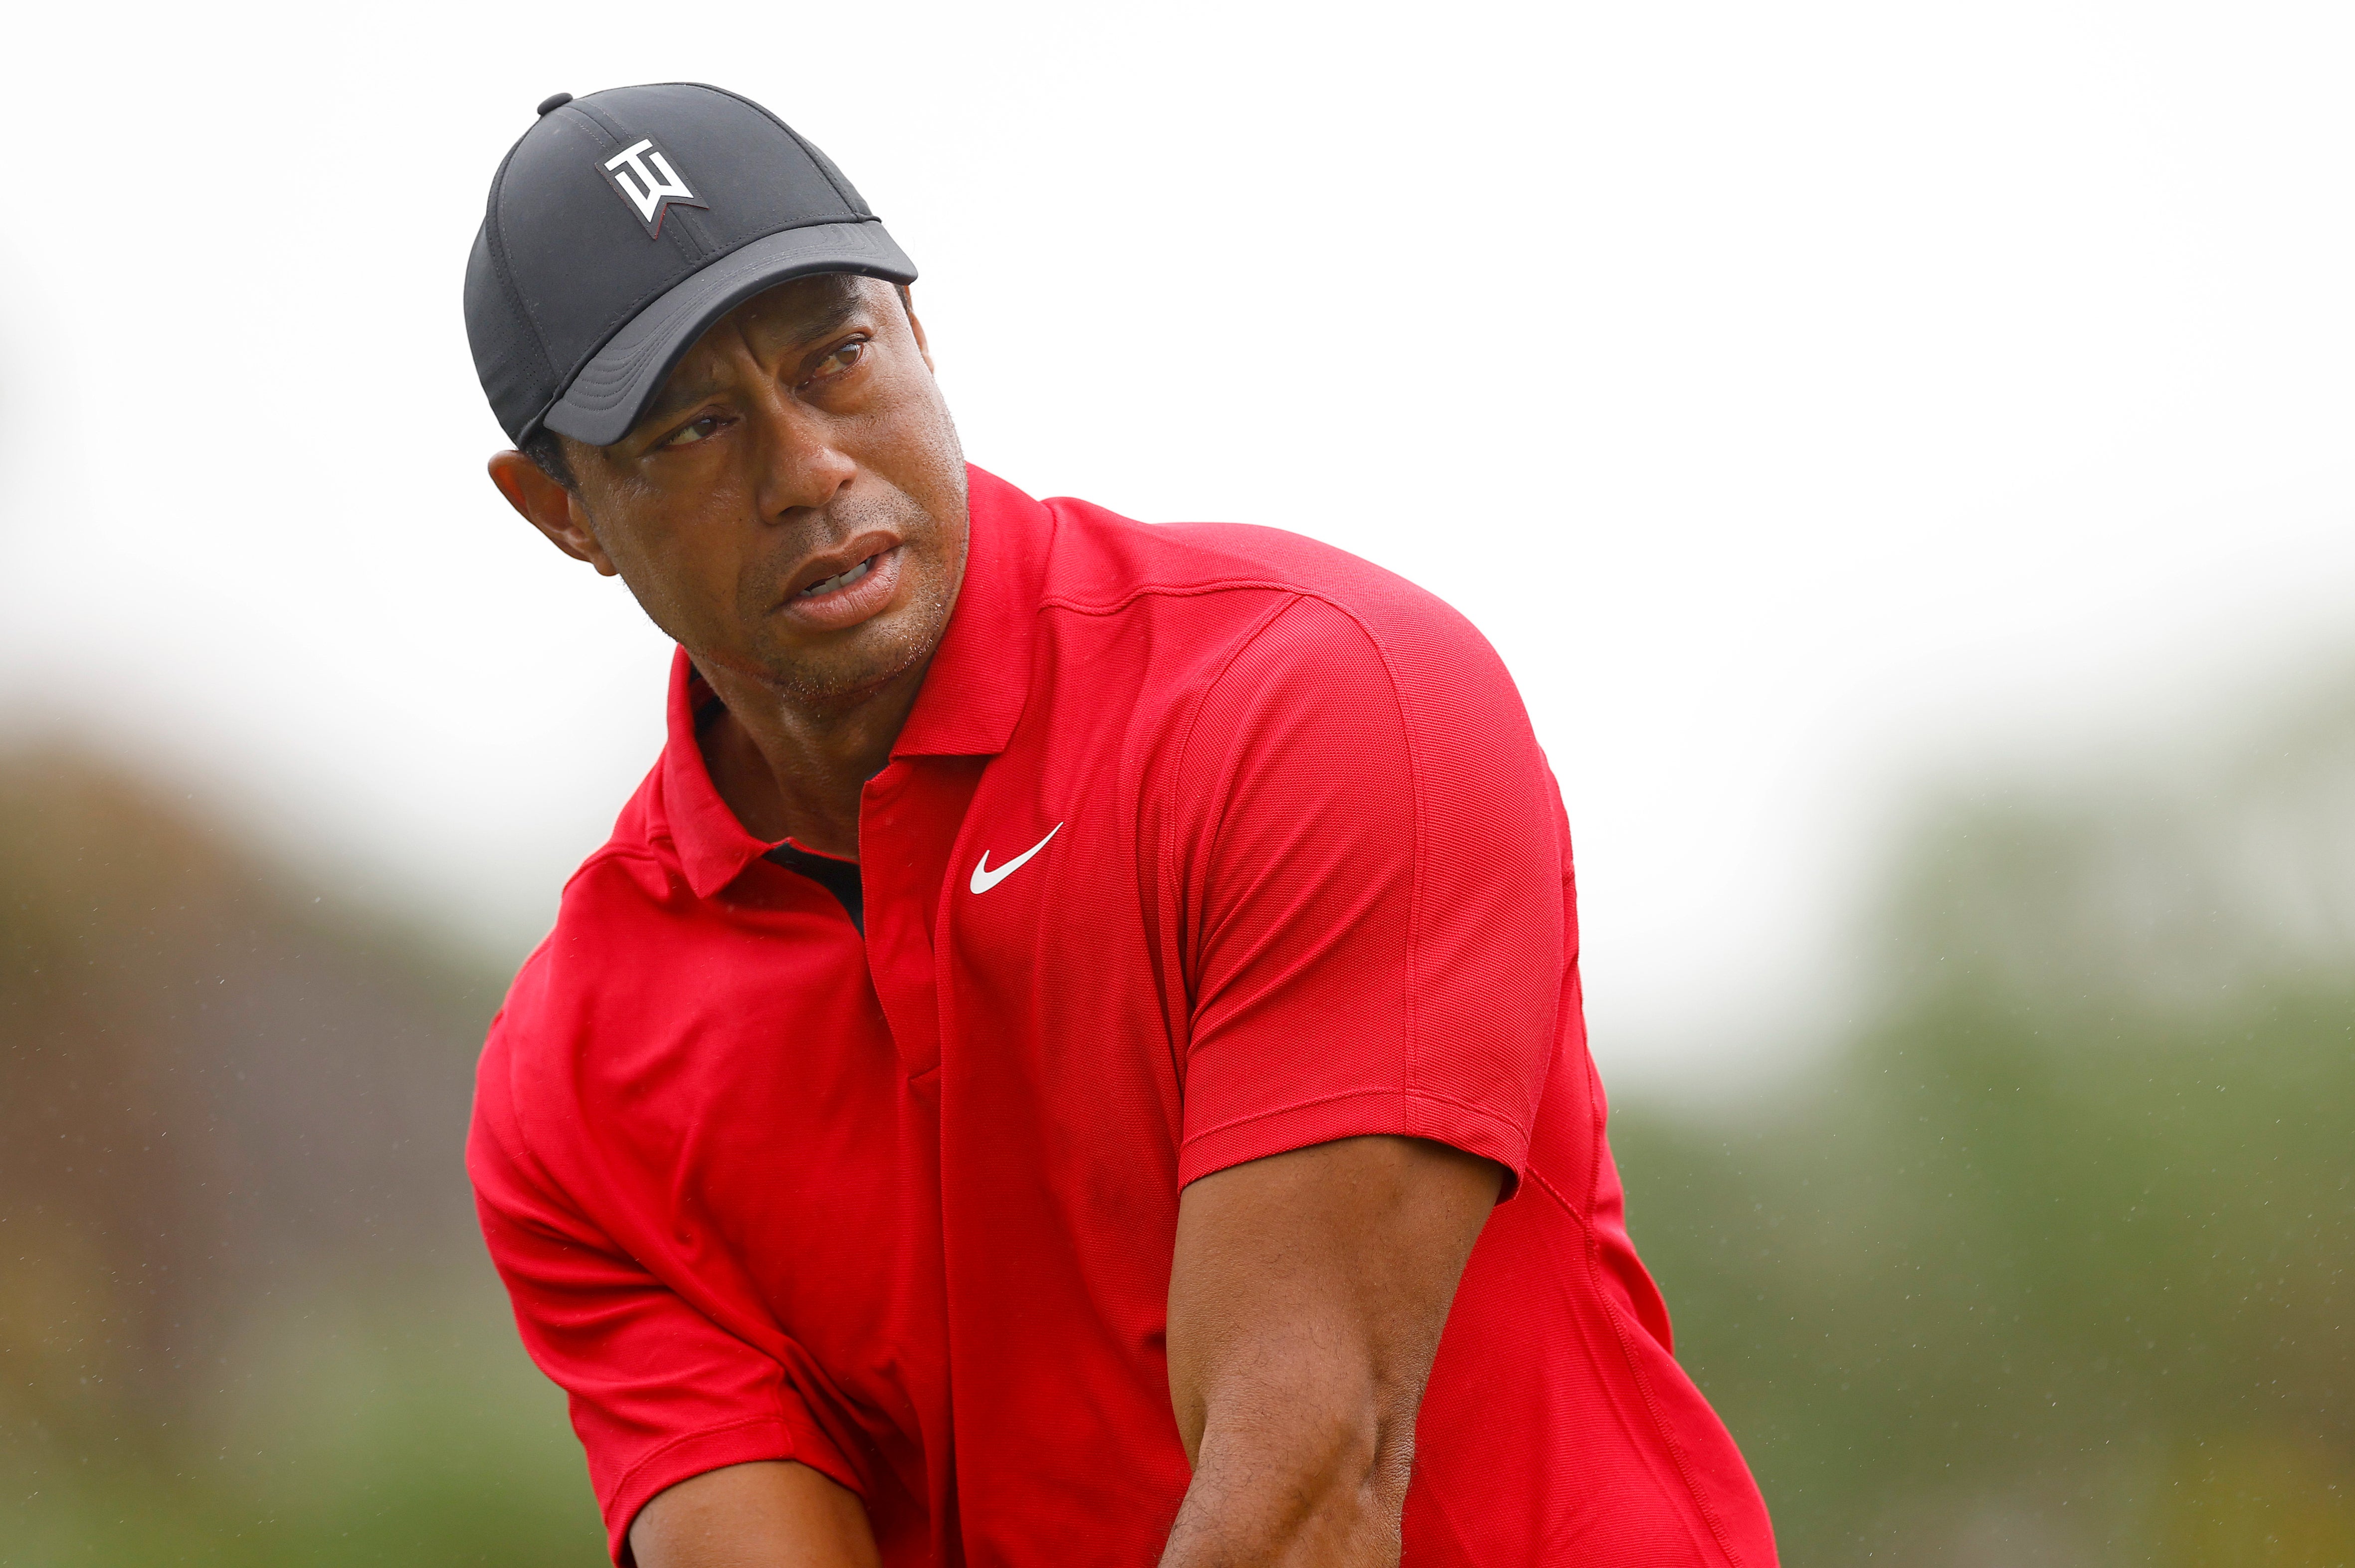 Tiger Woods has been sponsored by Nike throughout his career